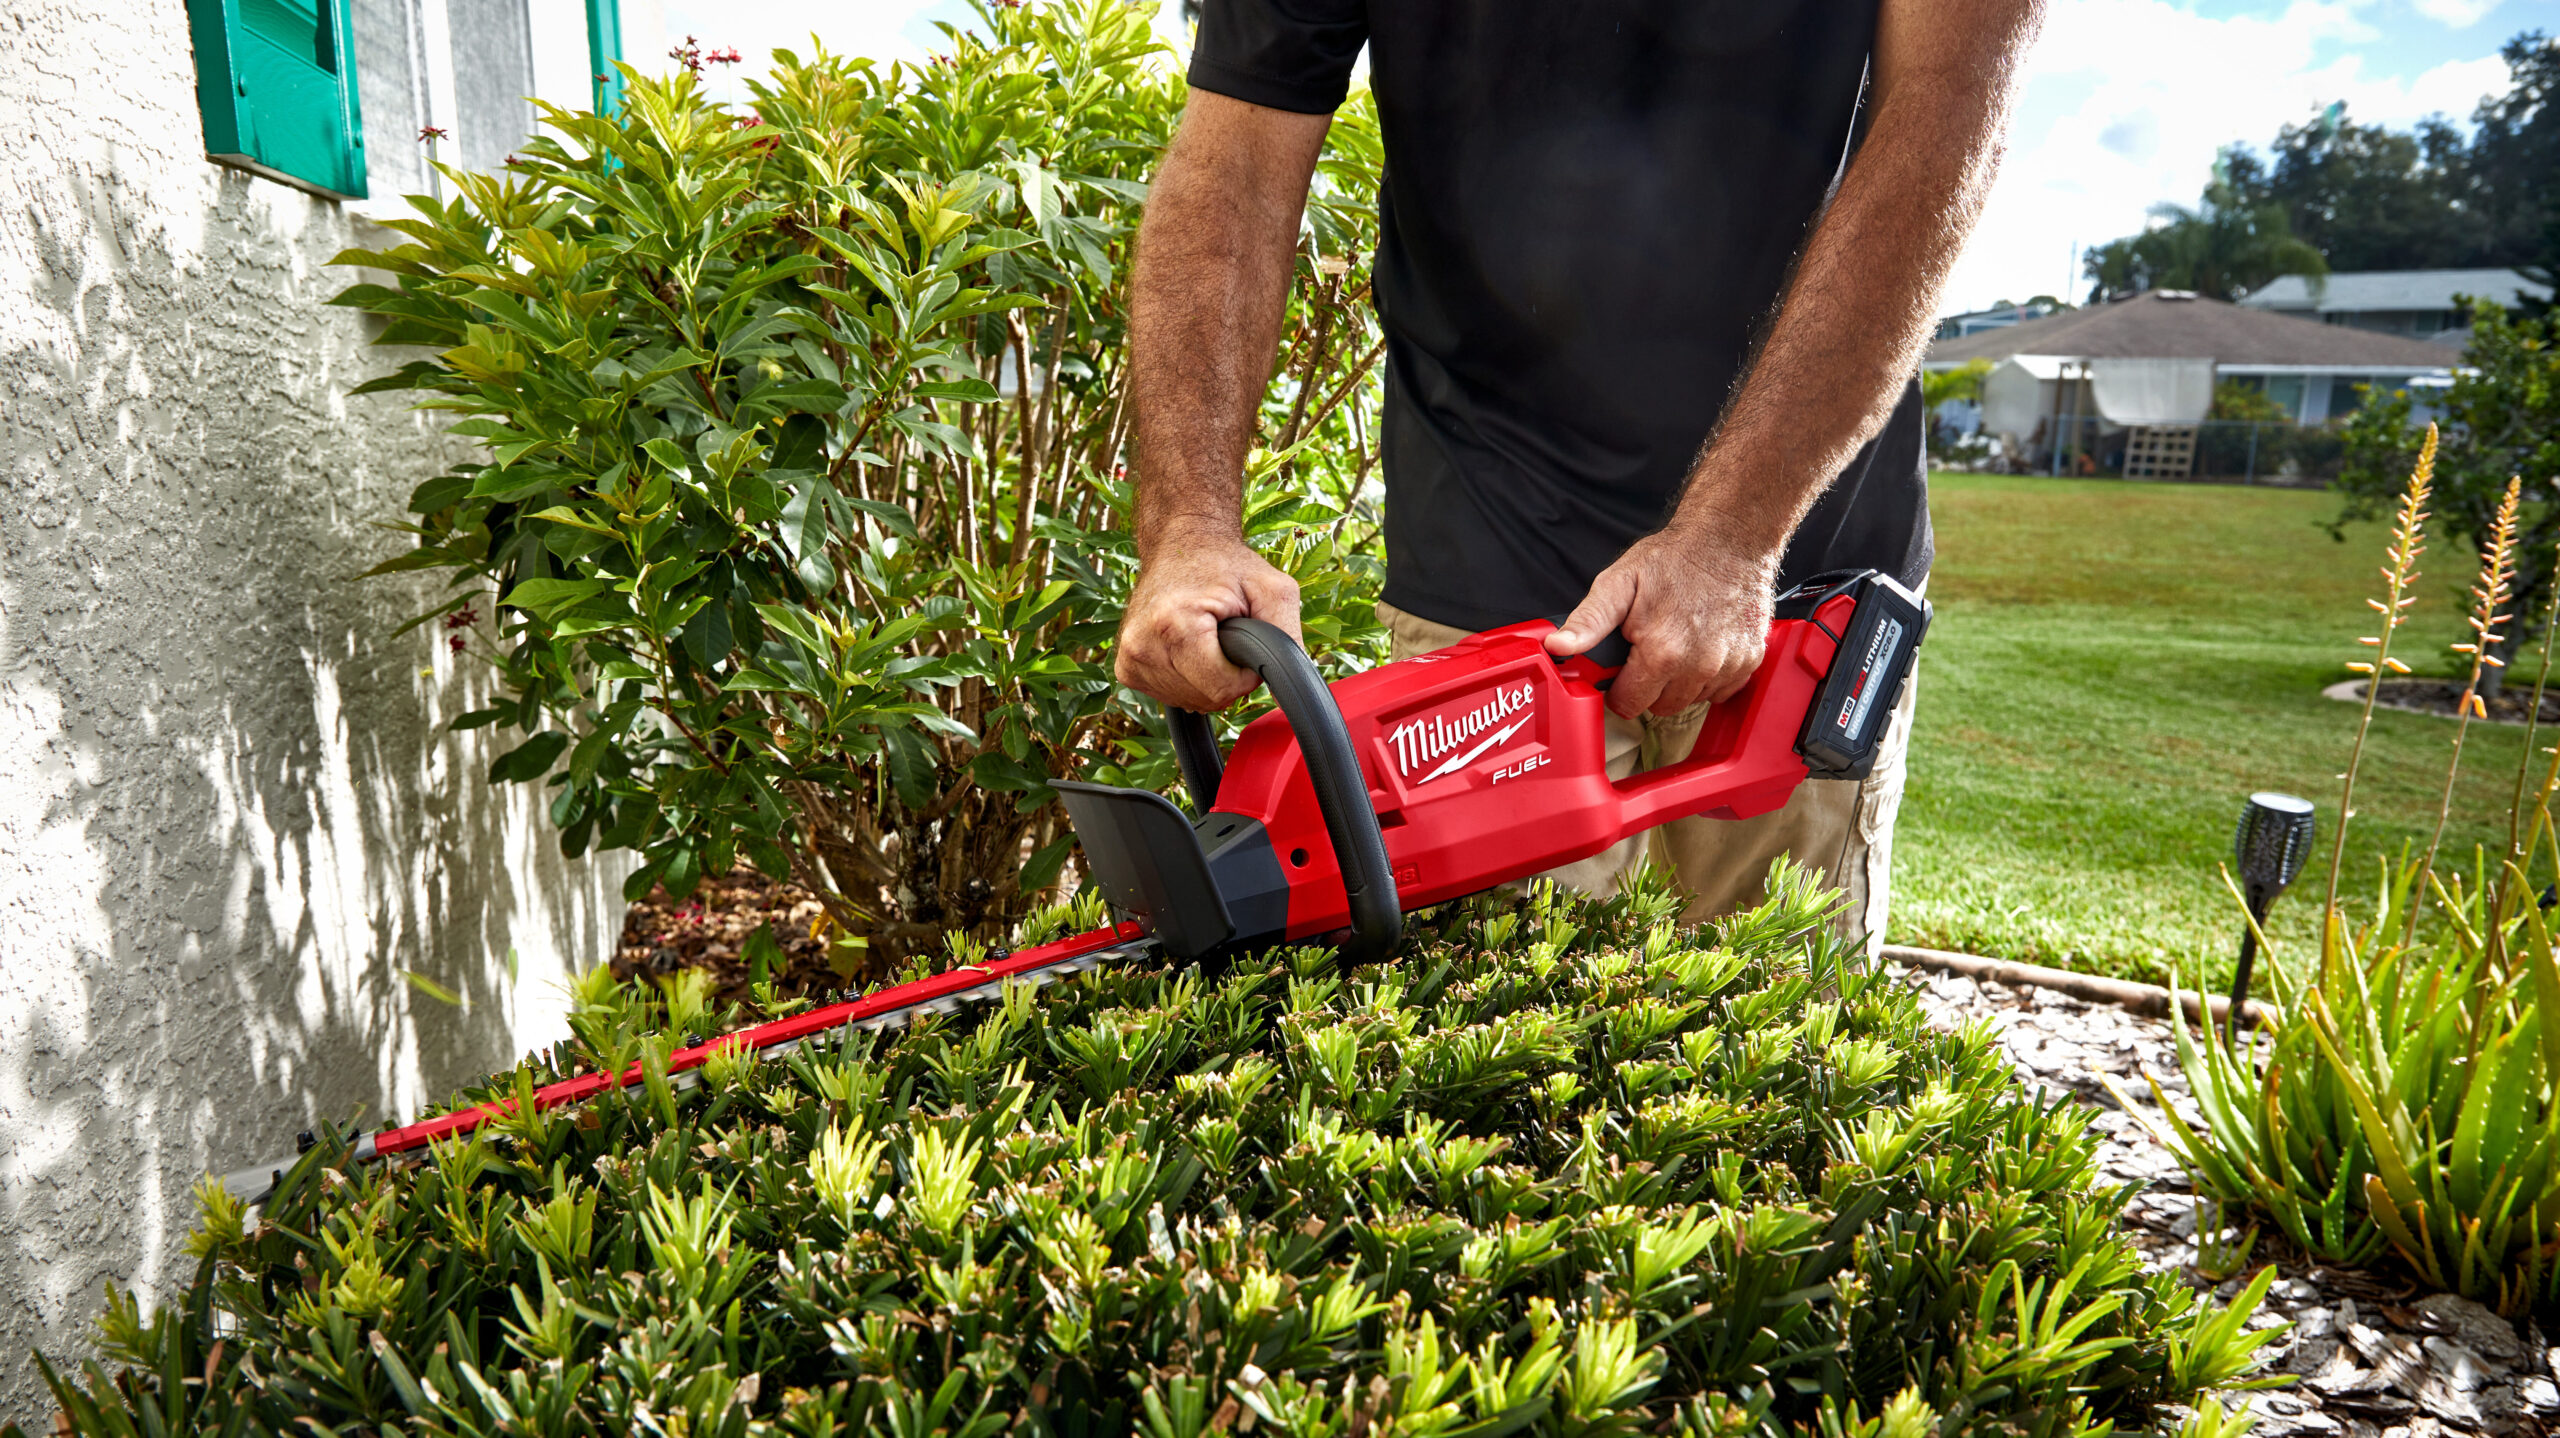 The18" Hedge trimmer is the perfect size to reach into smaller areas. 